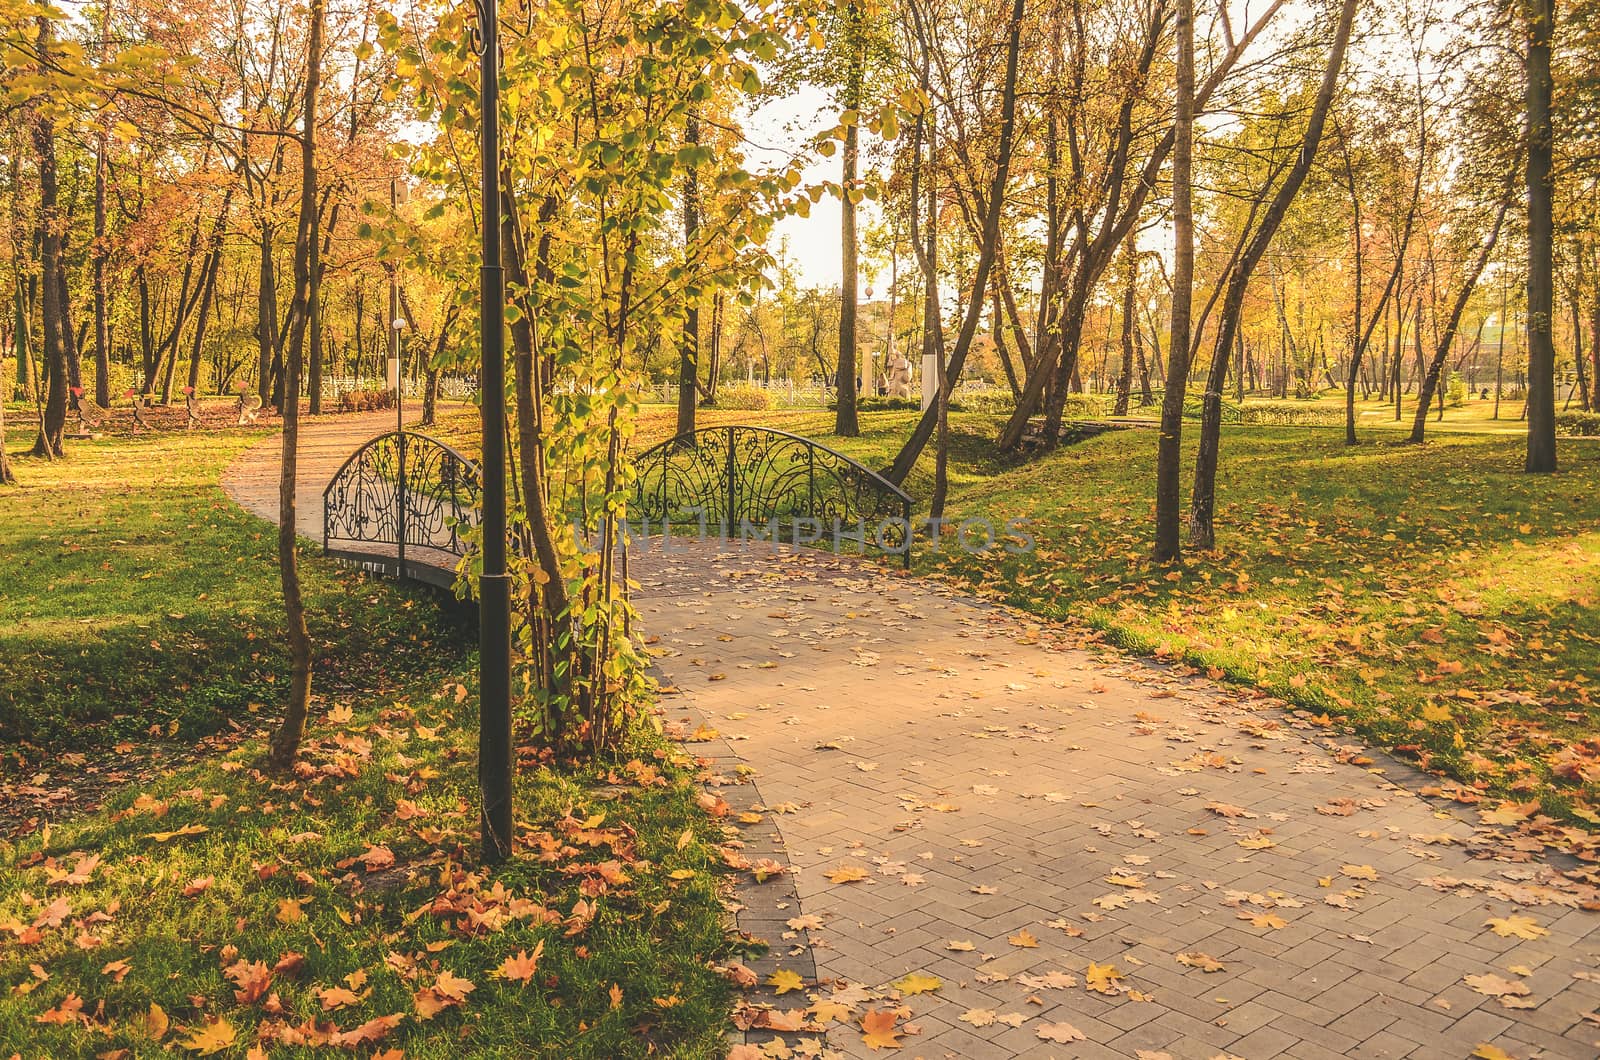 Walking path in the beautiful autumn park by chernobrovin